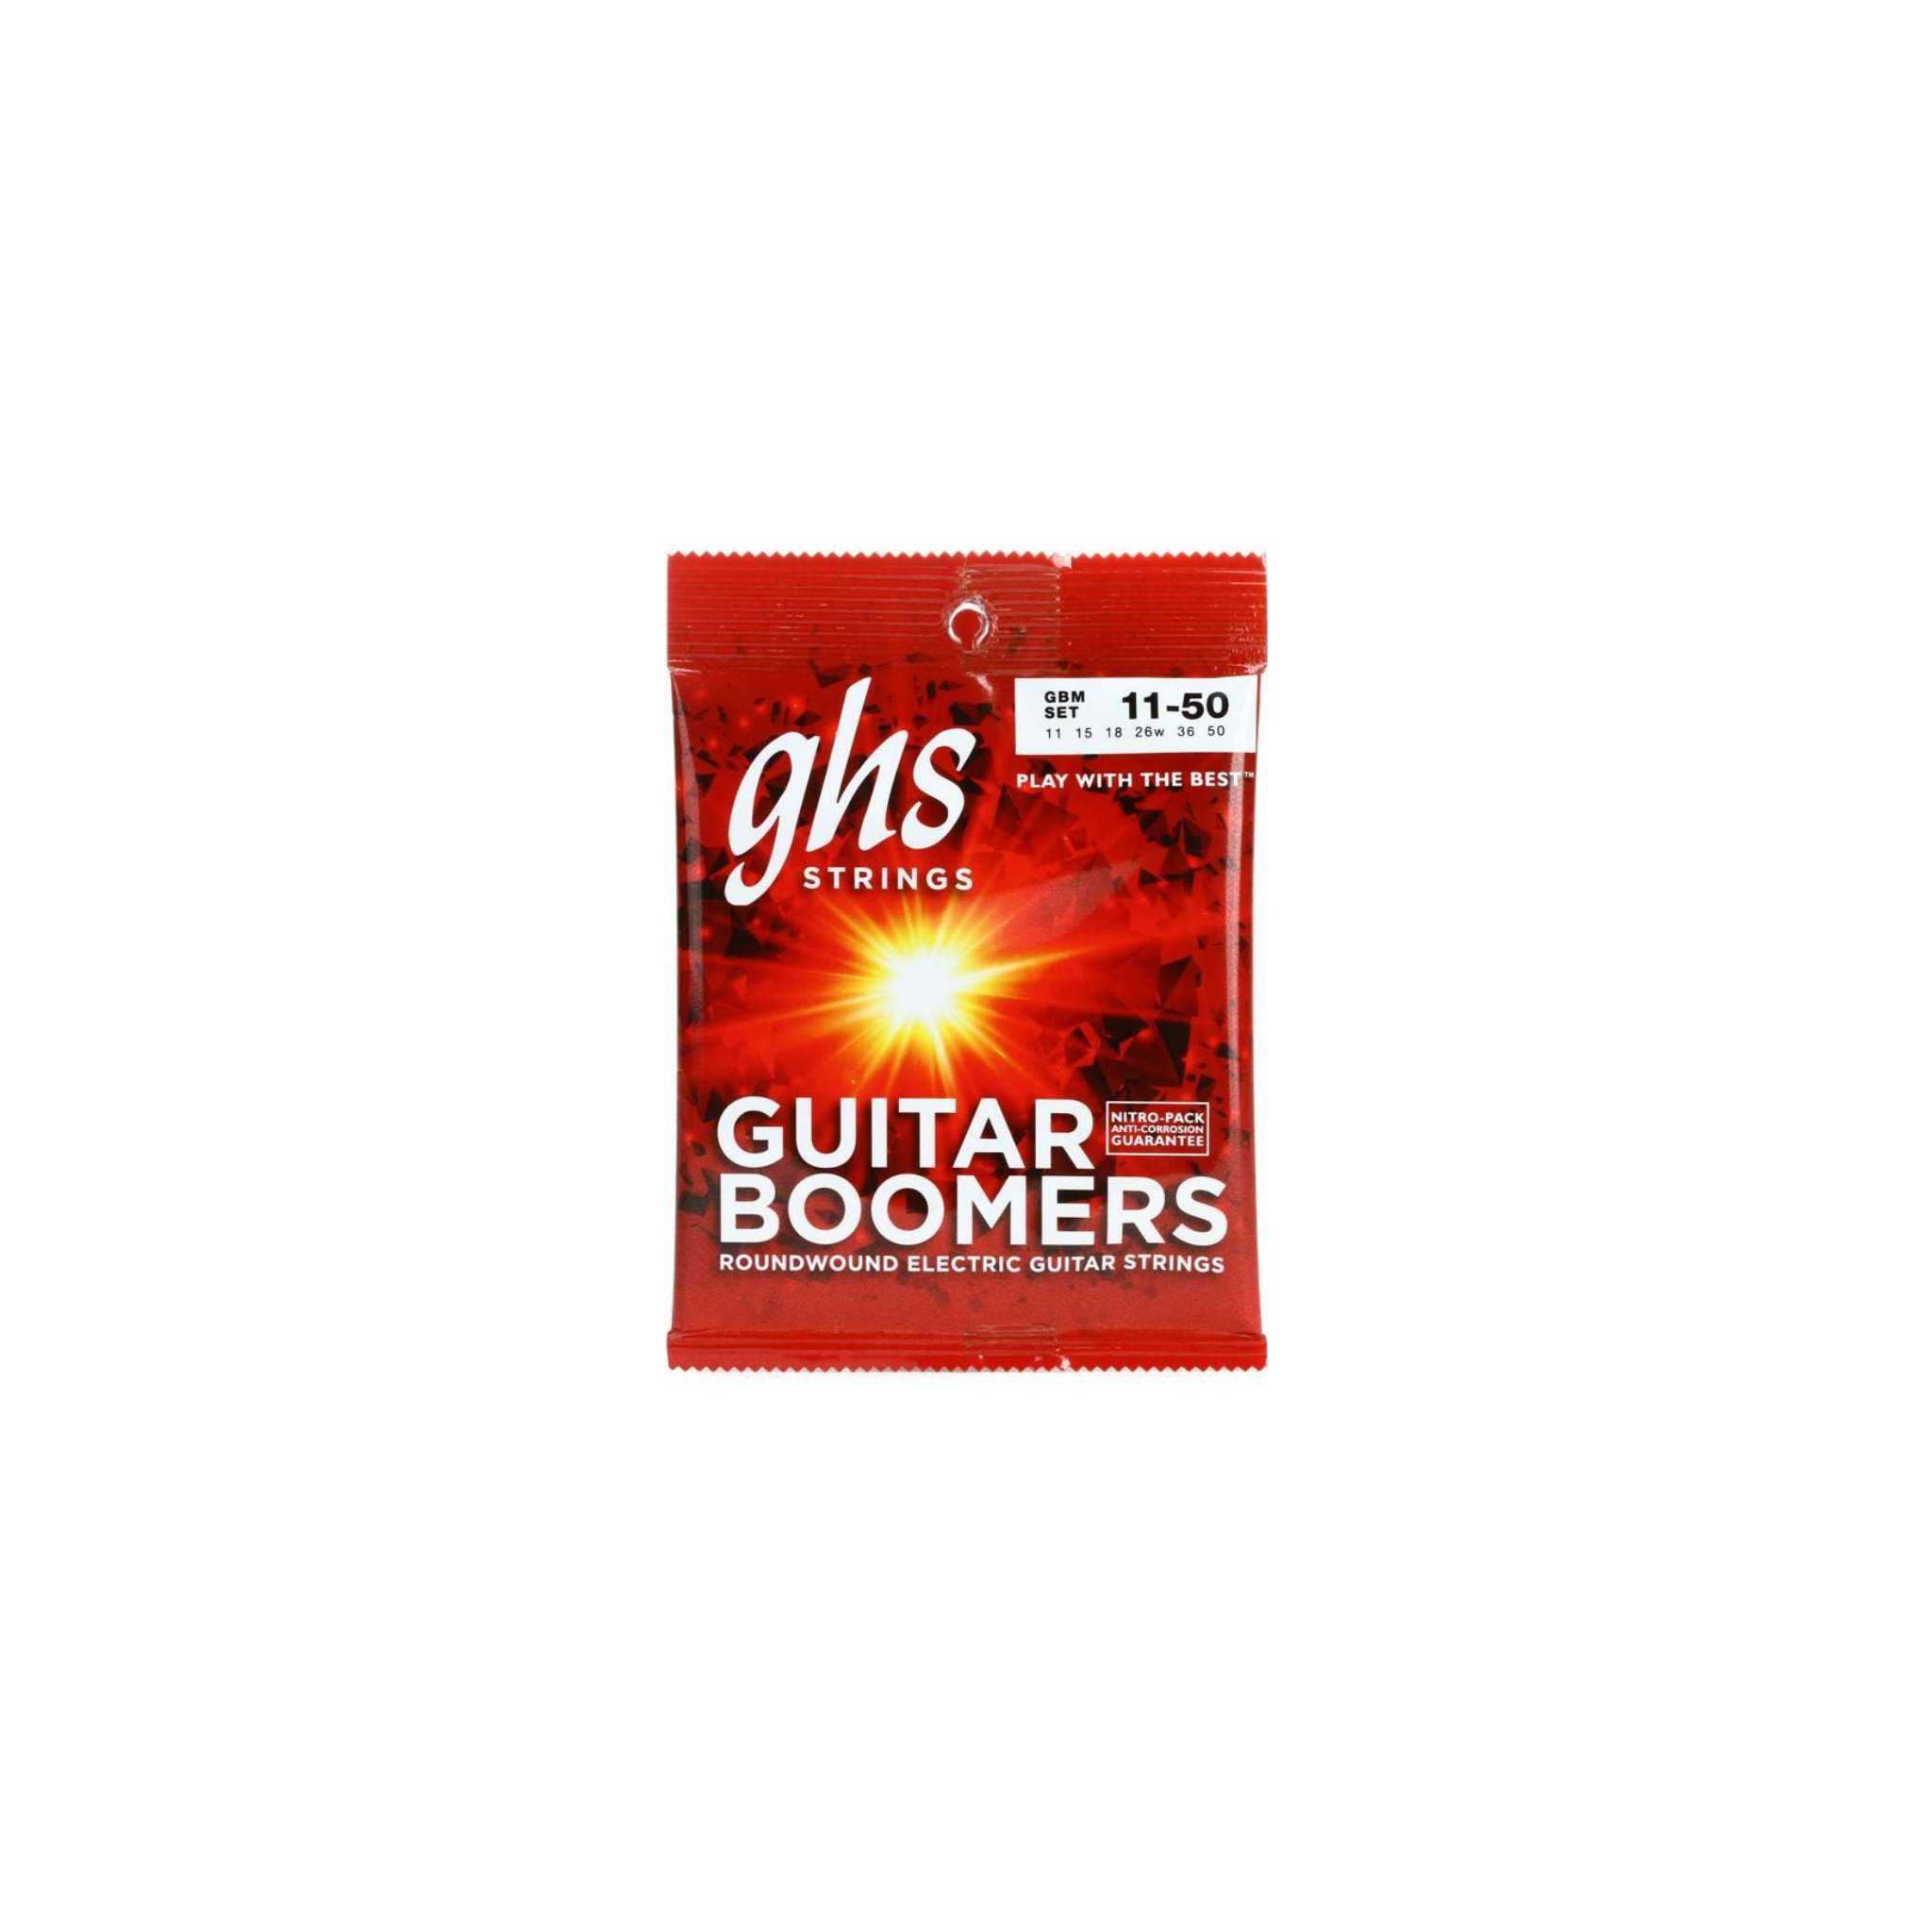 GHS Guitar Boomers 11-50